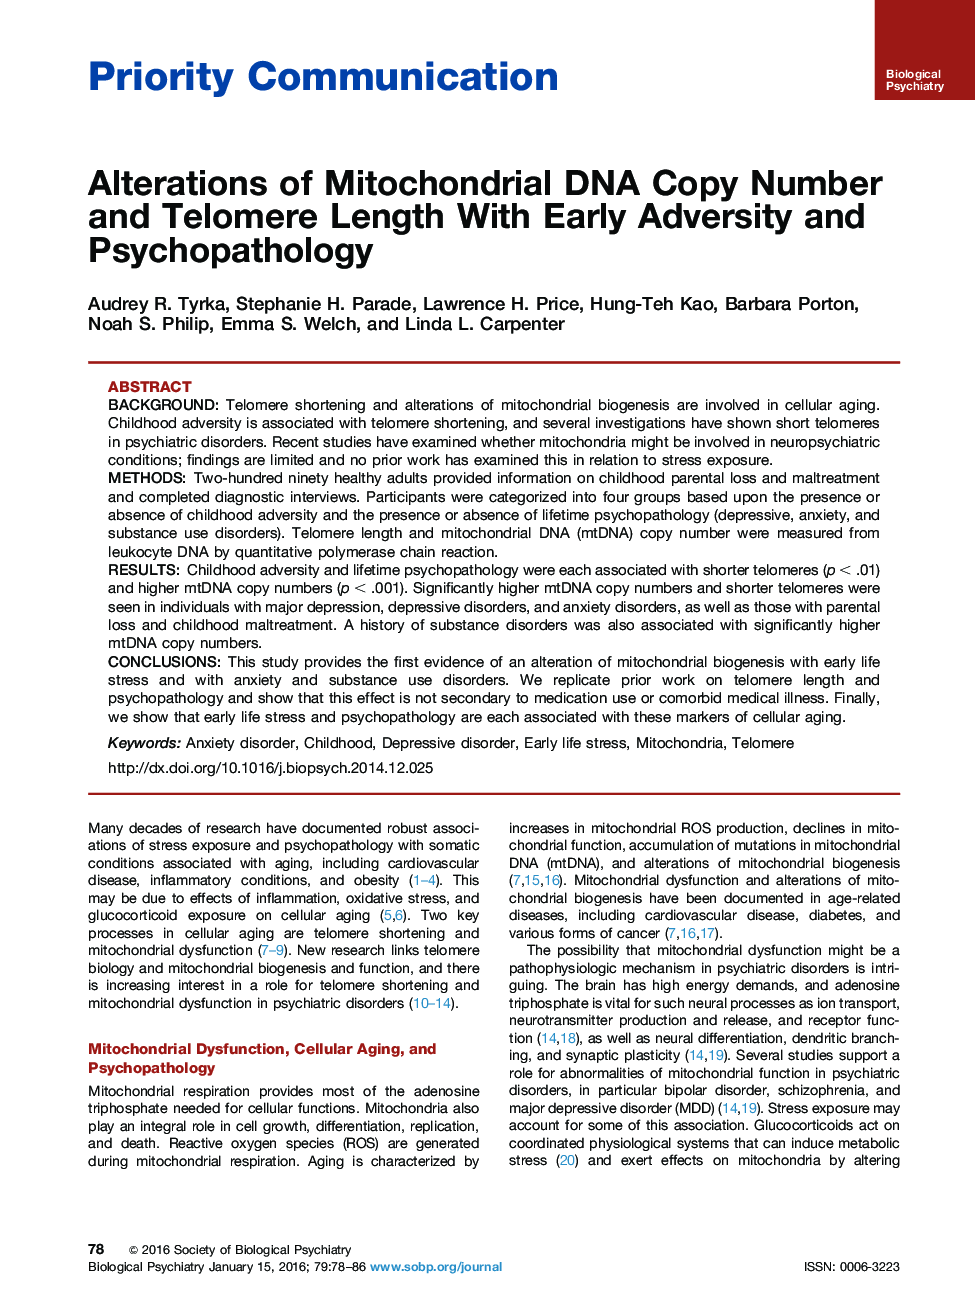 Alterations of Mitochondrial DNA Copy Number and Telomere Length With Early Adversity and Psychopathology